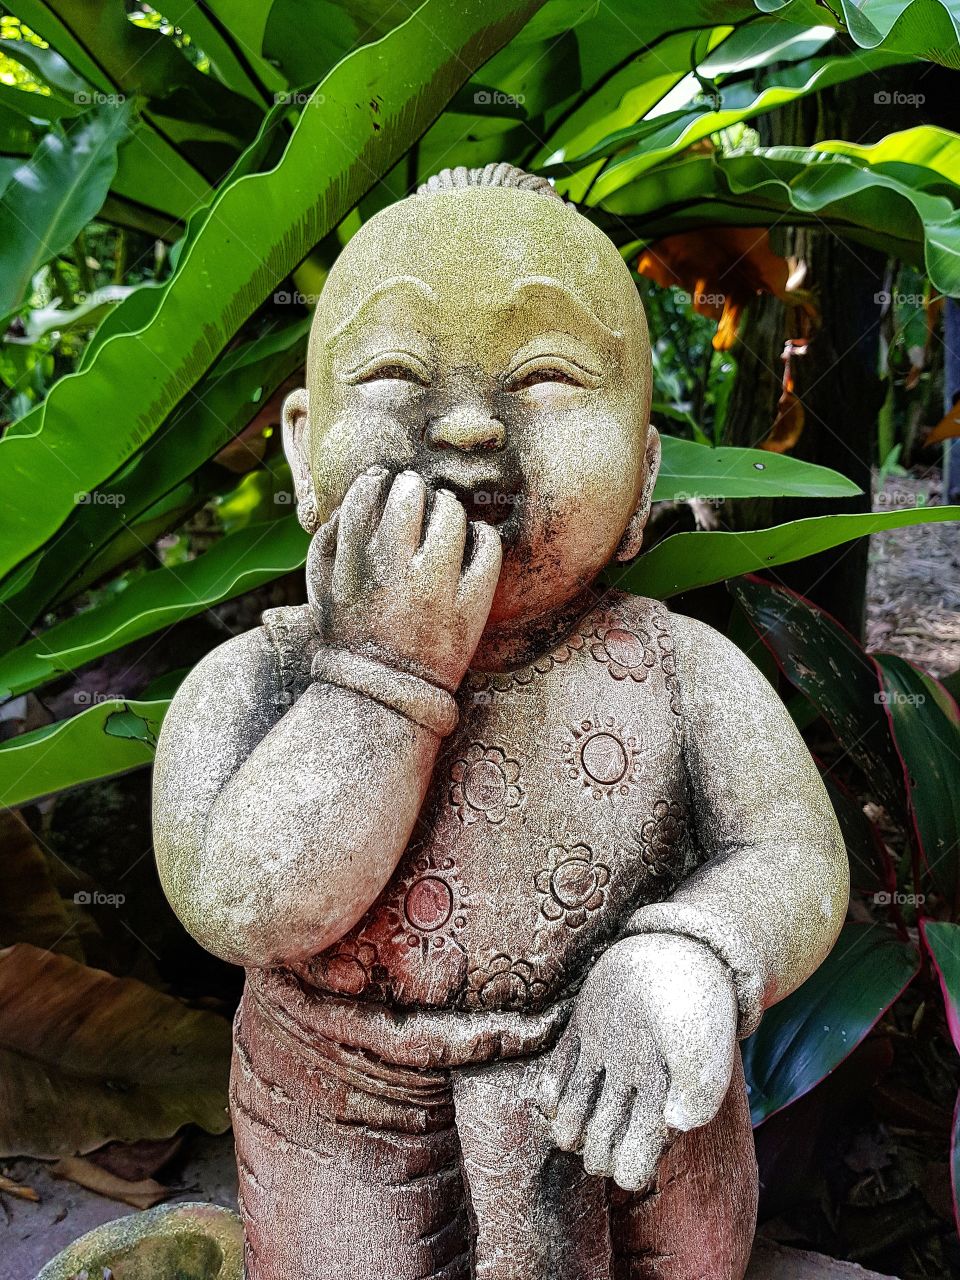 Laughing statue in garden